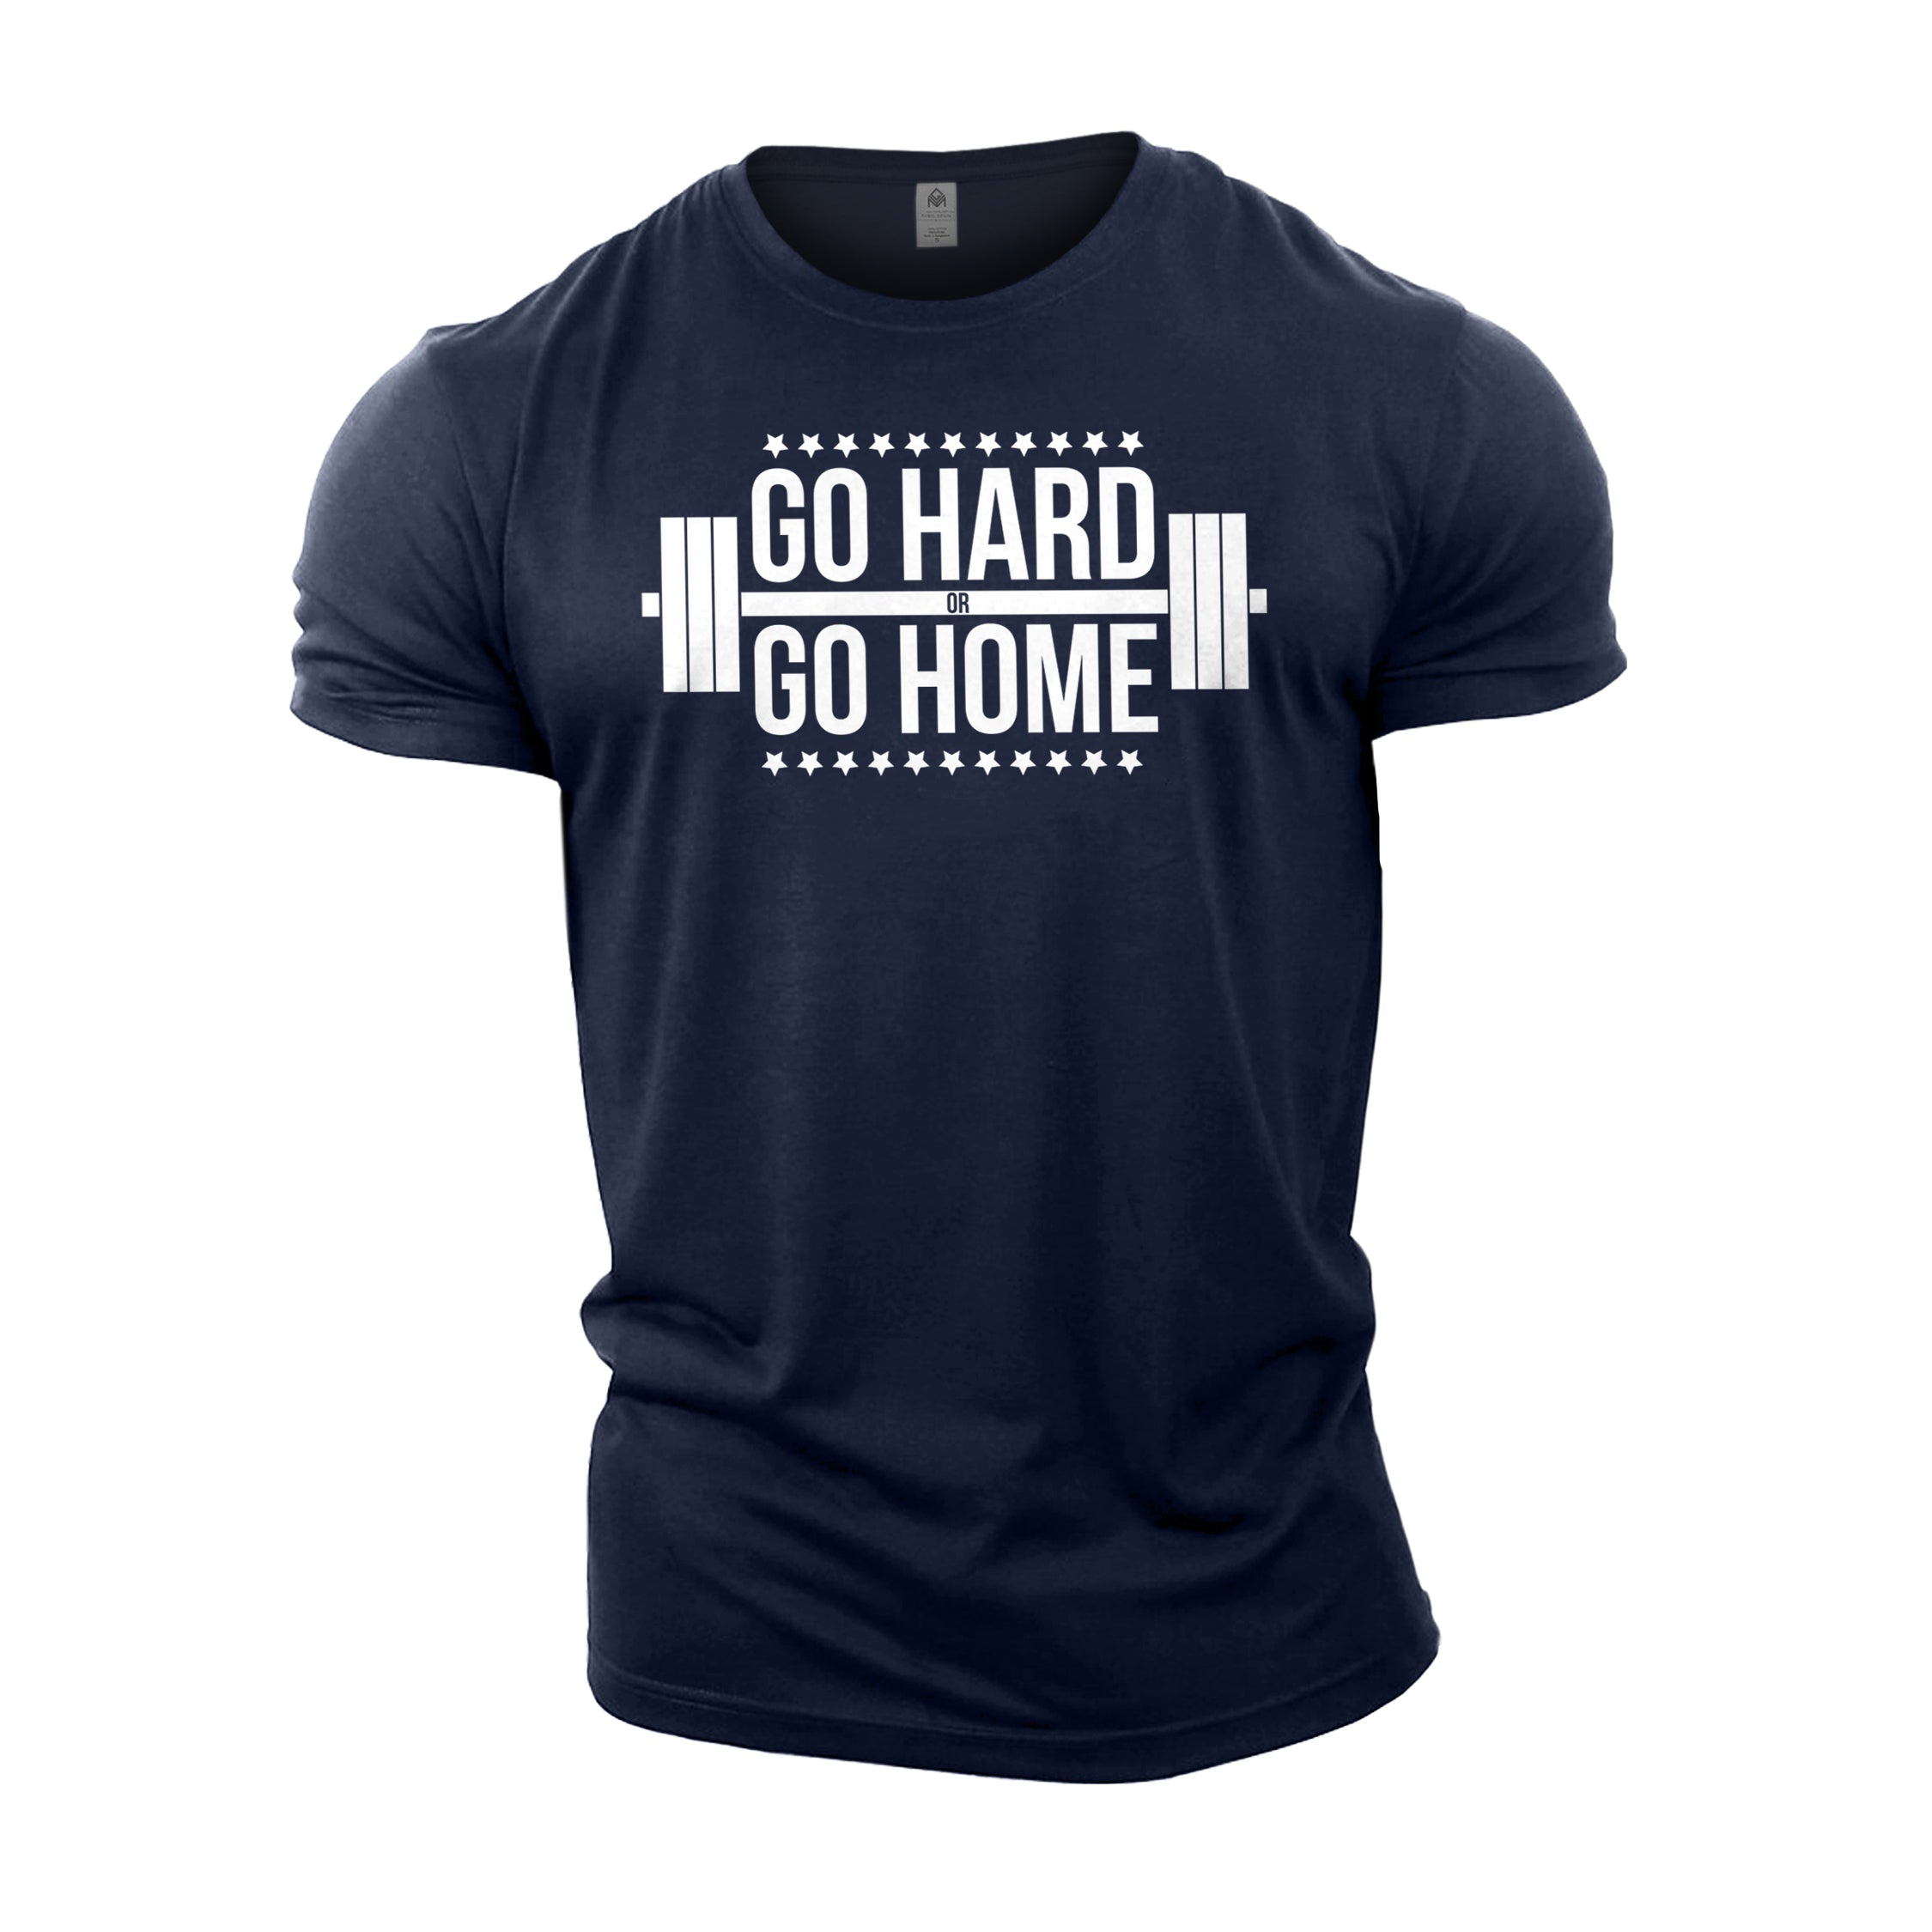 Go Hard Or Go To Planet Fitness T Shirt Women's T-Shirt